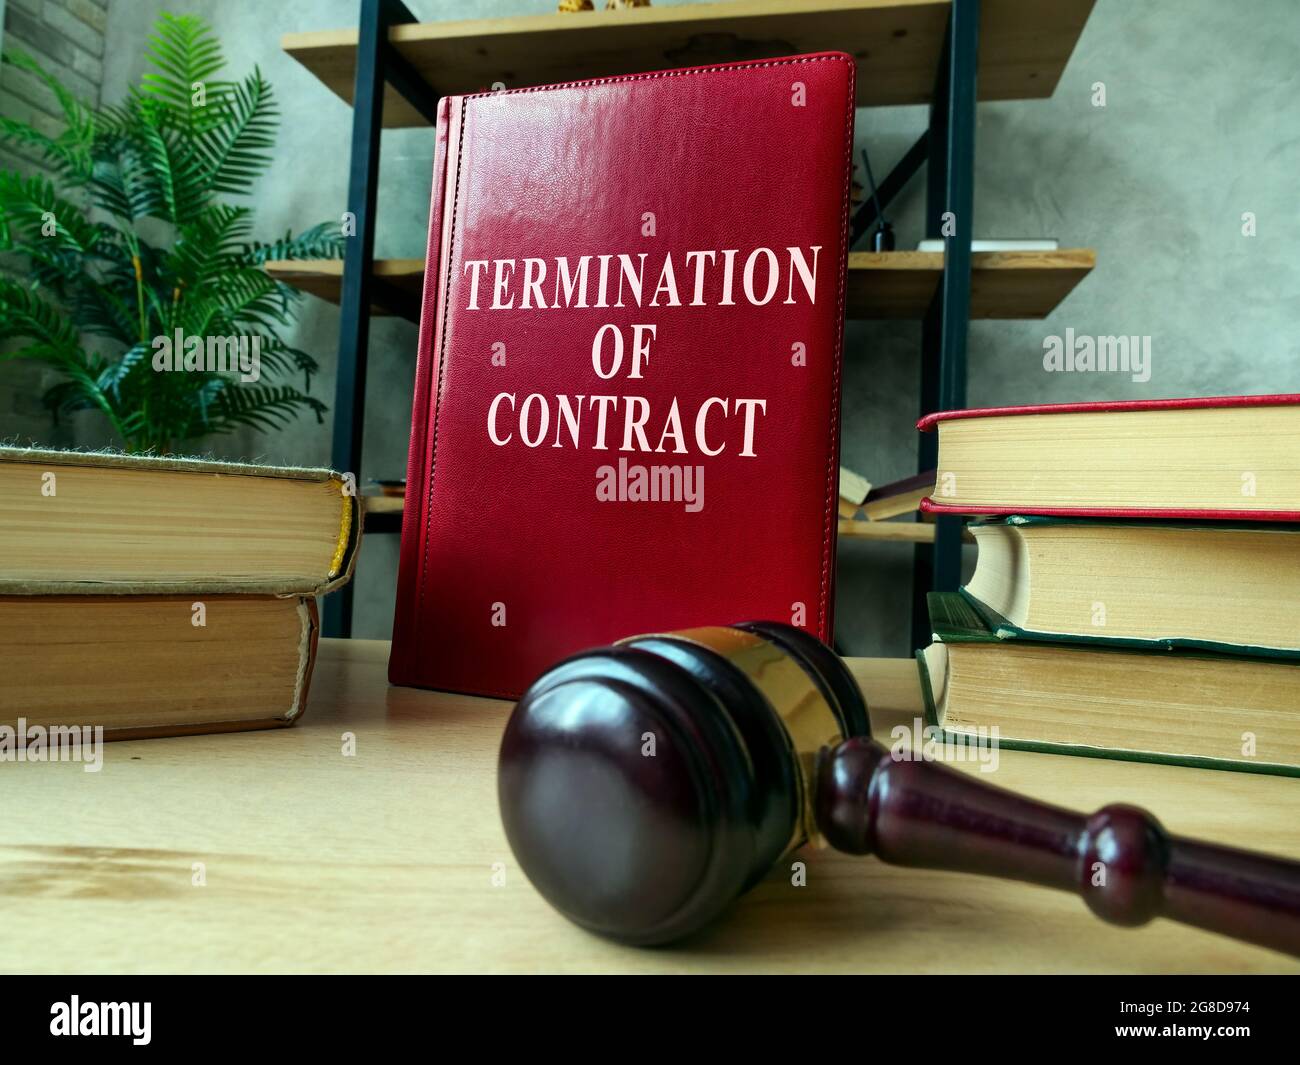 Guide about termination of contract and gavel. Stock Photo